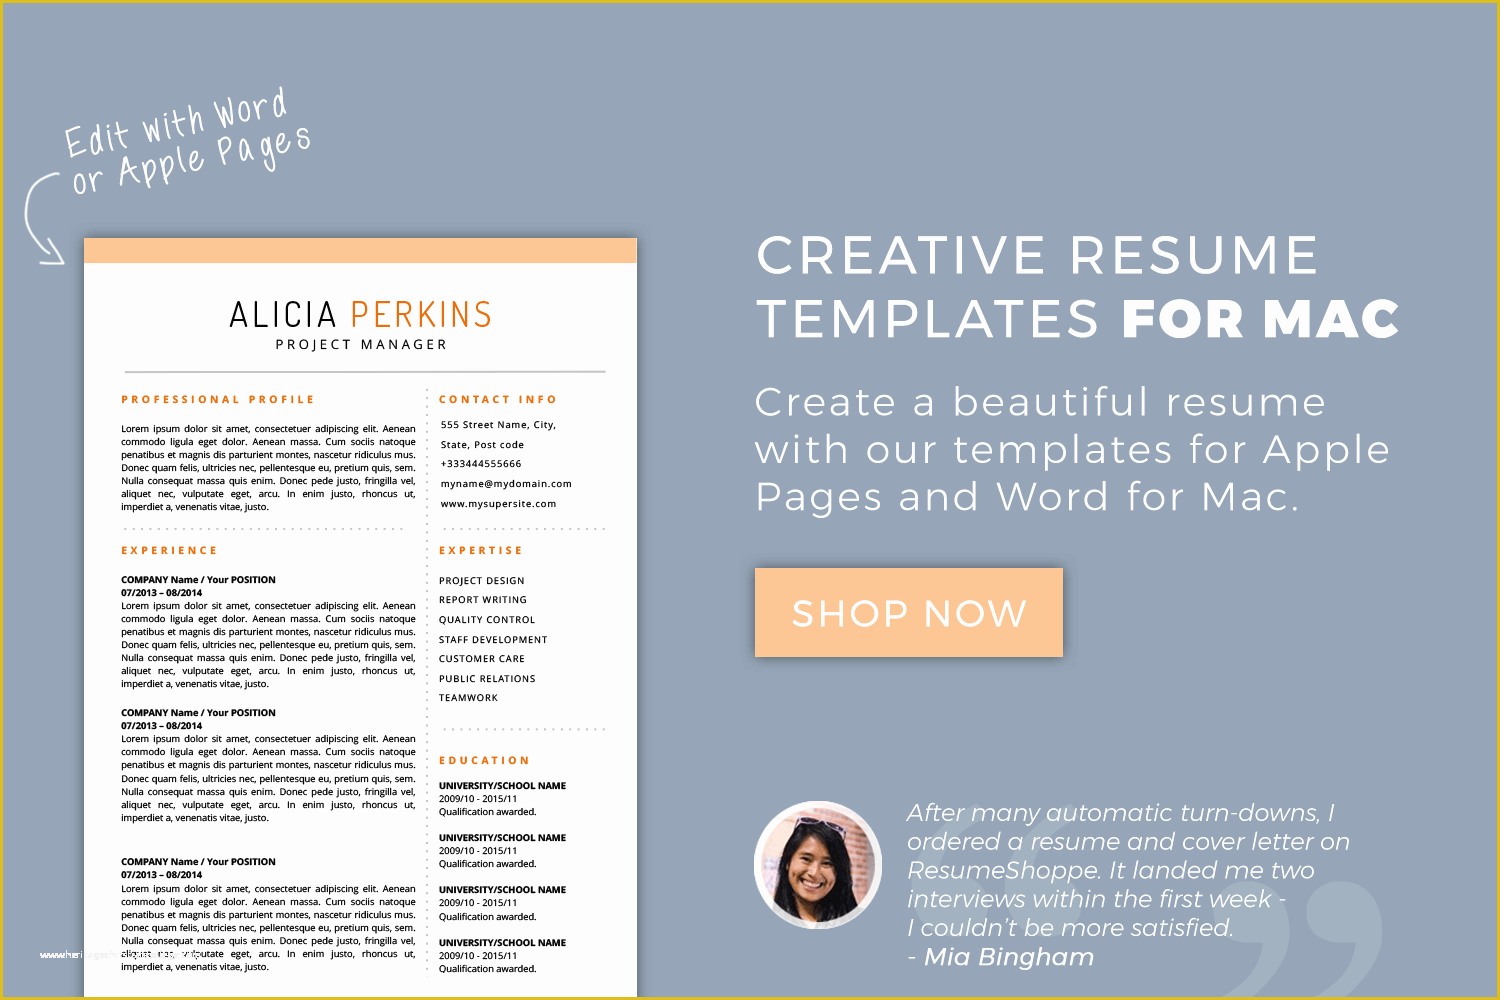 Mac Pages Templates Free Download Of Resume Templates for Mac Word & Apple Pages Instant